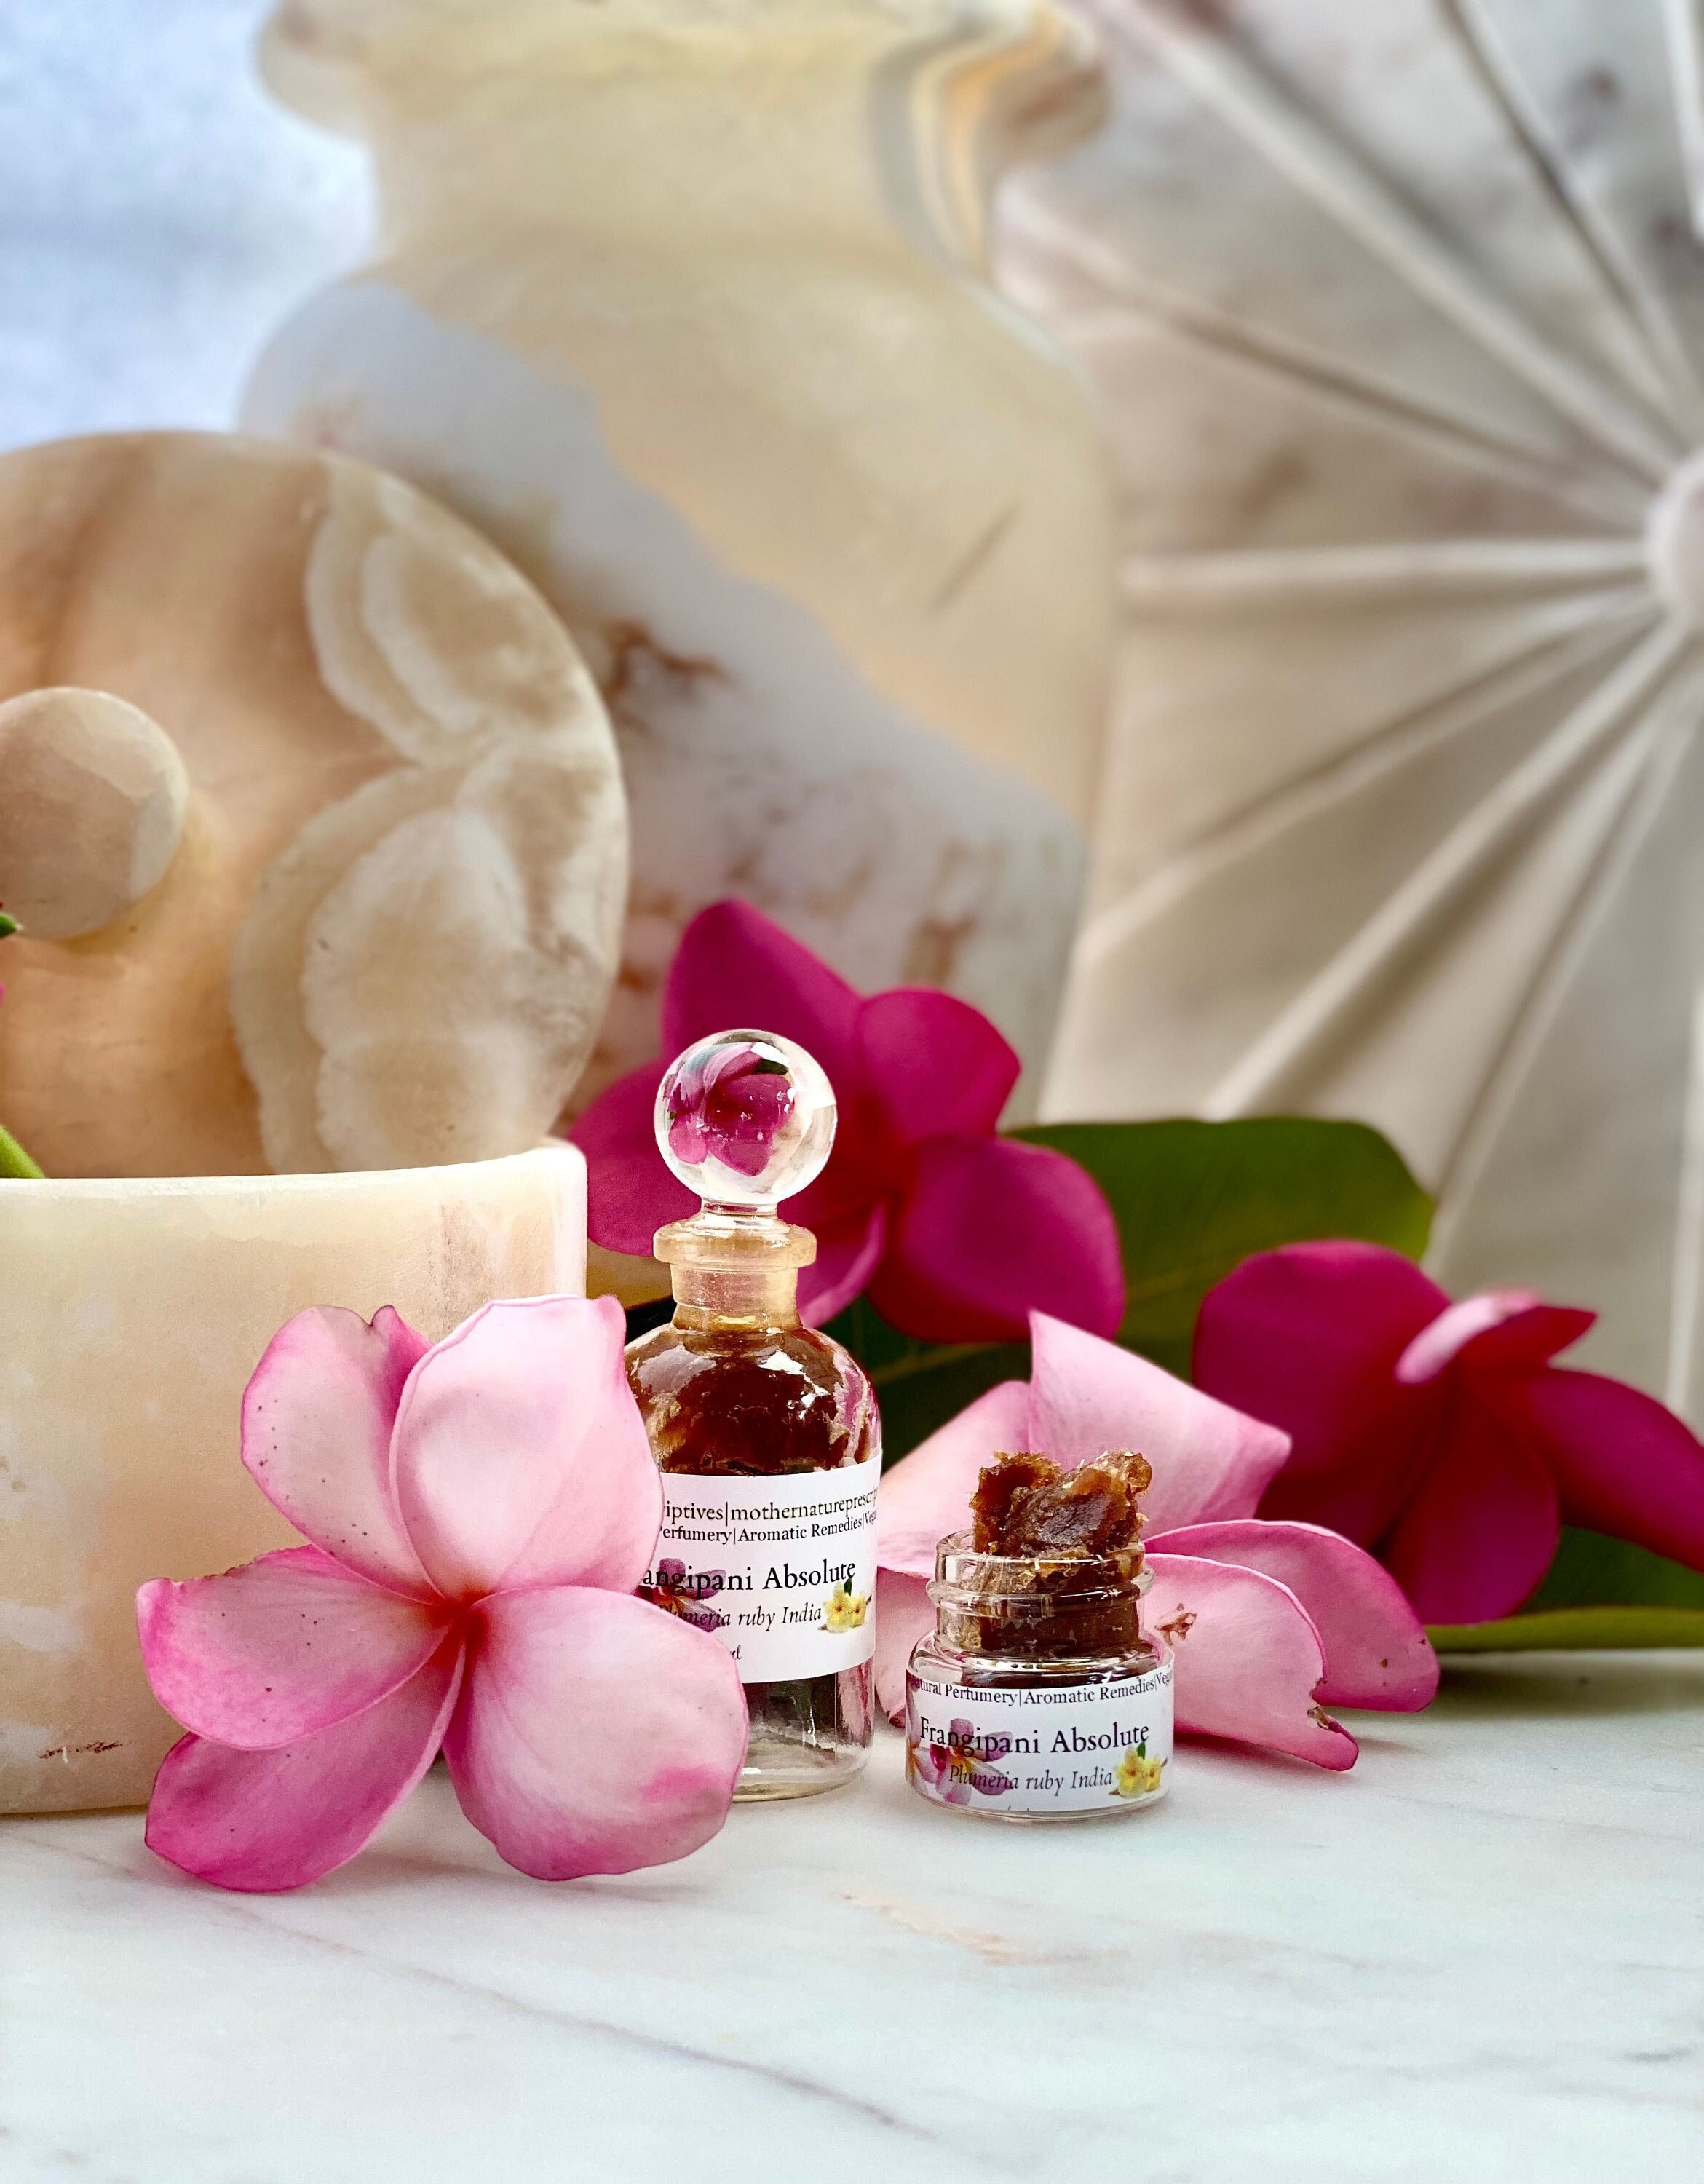 Egyptian Frangipani Essential Oil (Plumeria) - A Natural Perfume to Awaken  Joy. A Confident Floral Scent Used Alone or Mixed as a Top Note. - Nur  Creative Studio